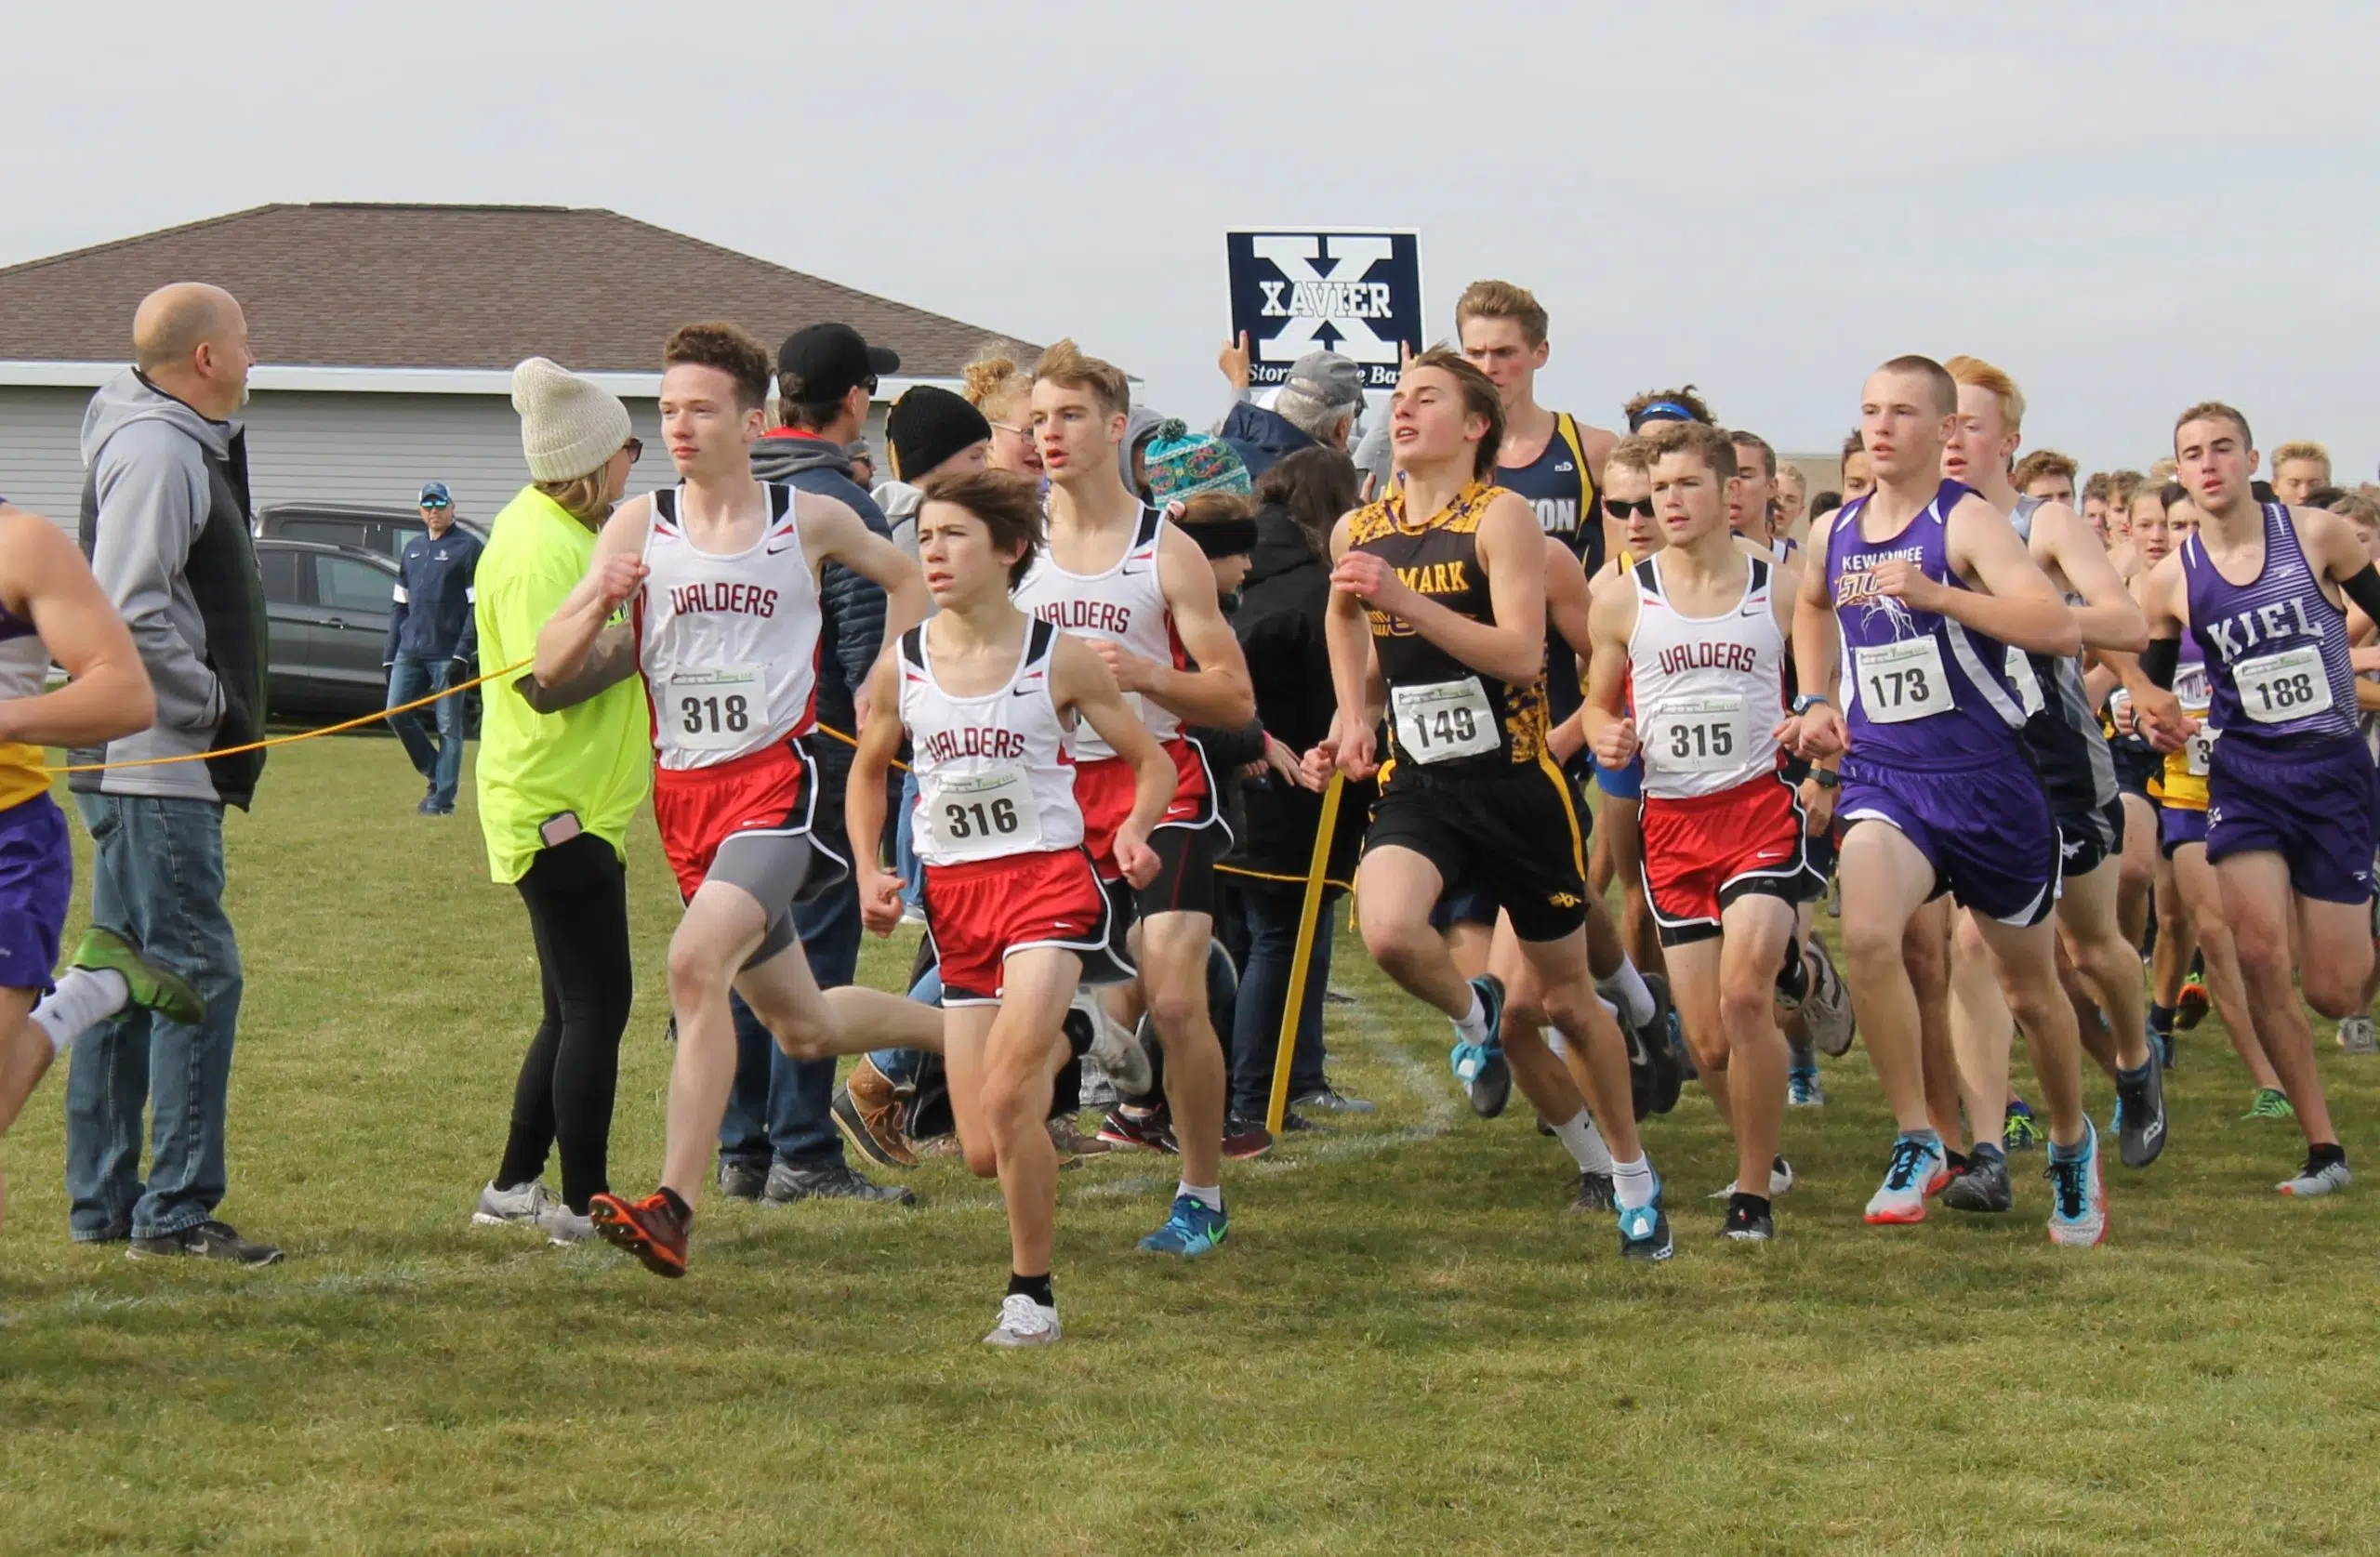 Top Cross Country Runners Named To Weekly Honor Roll Seehafer News